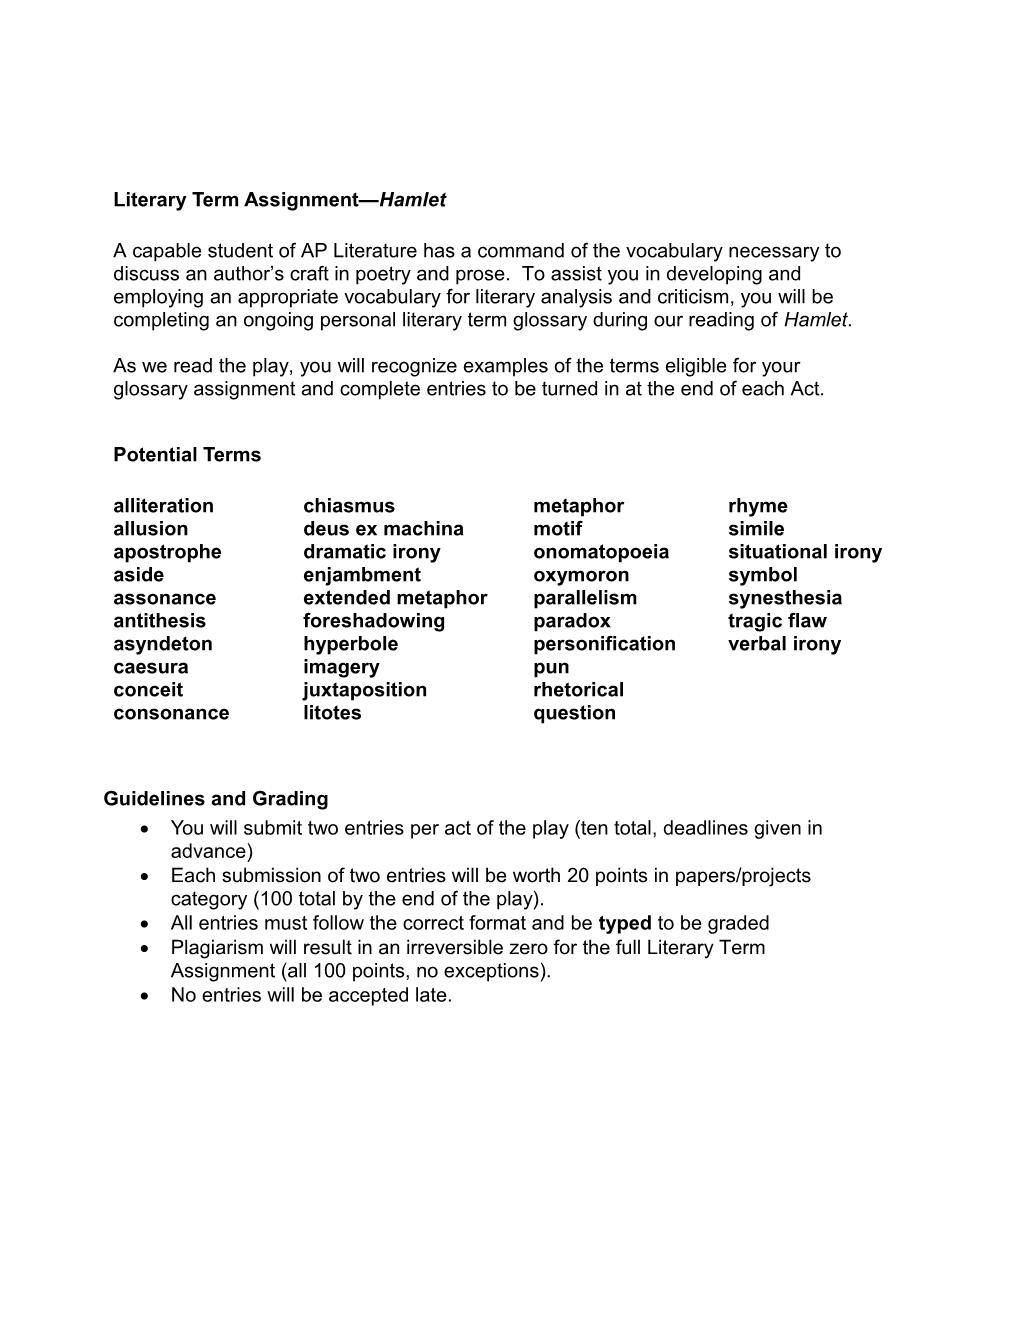 Literary Term Glossary Assignment